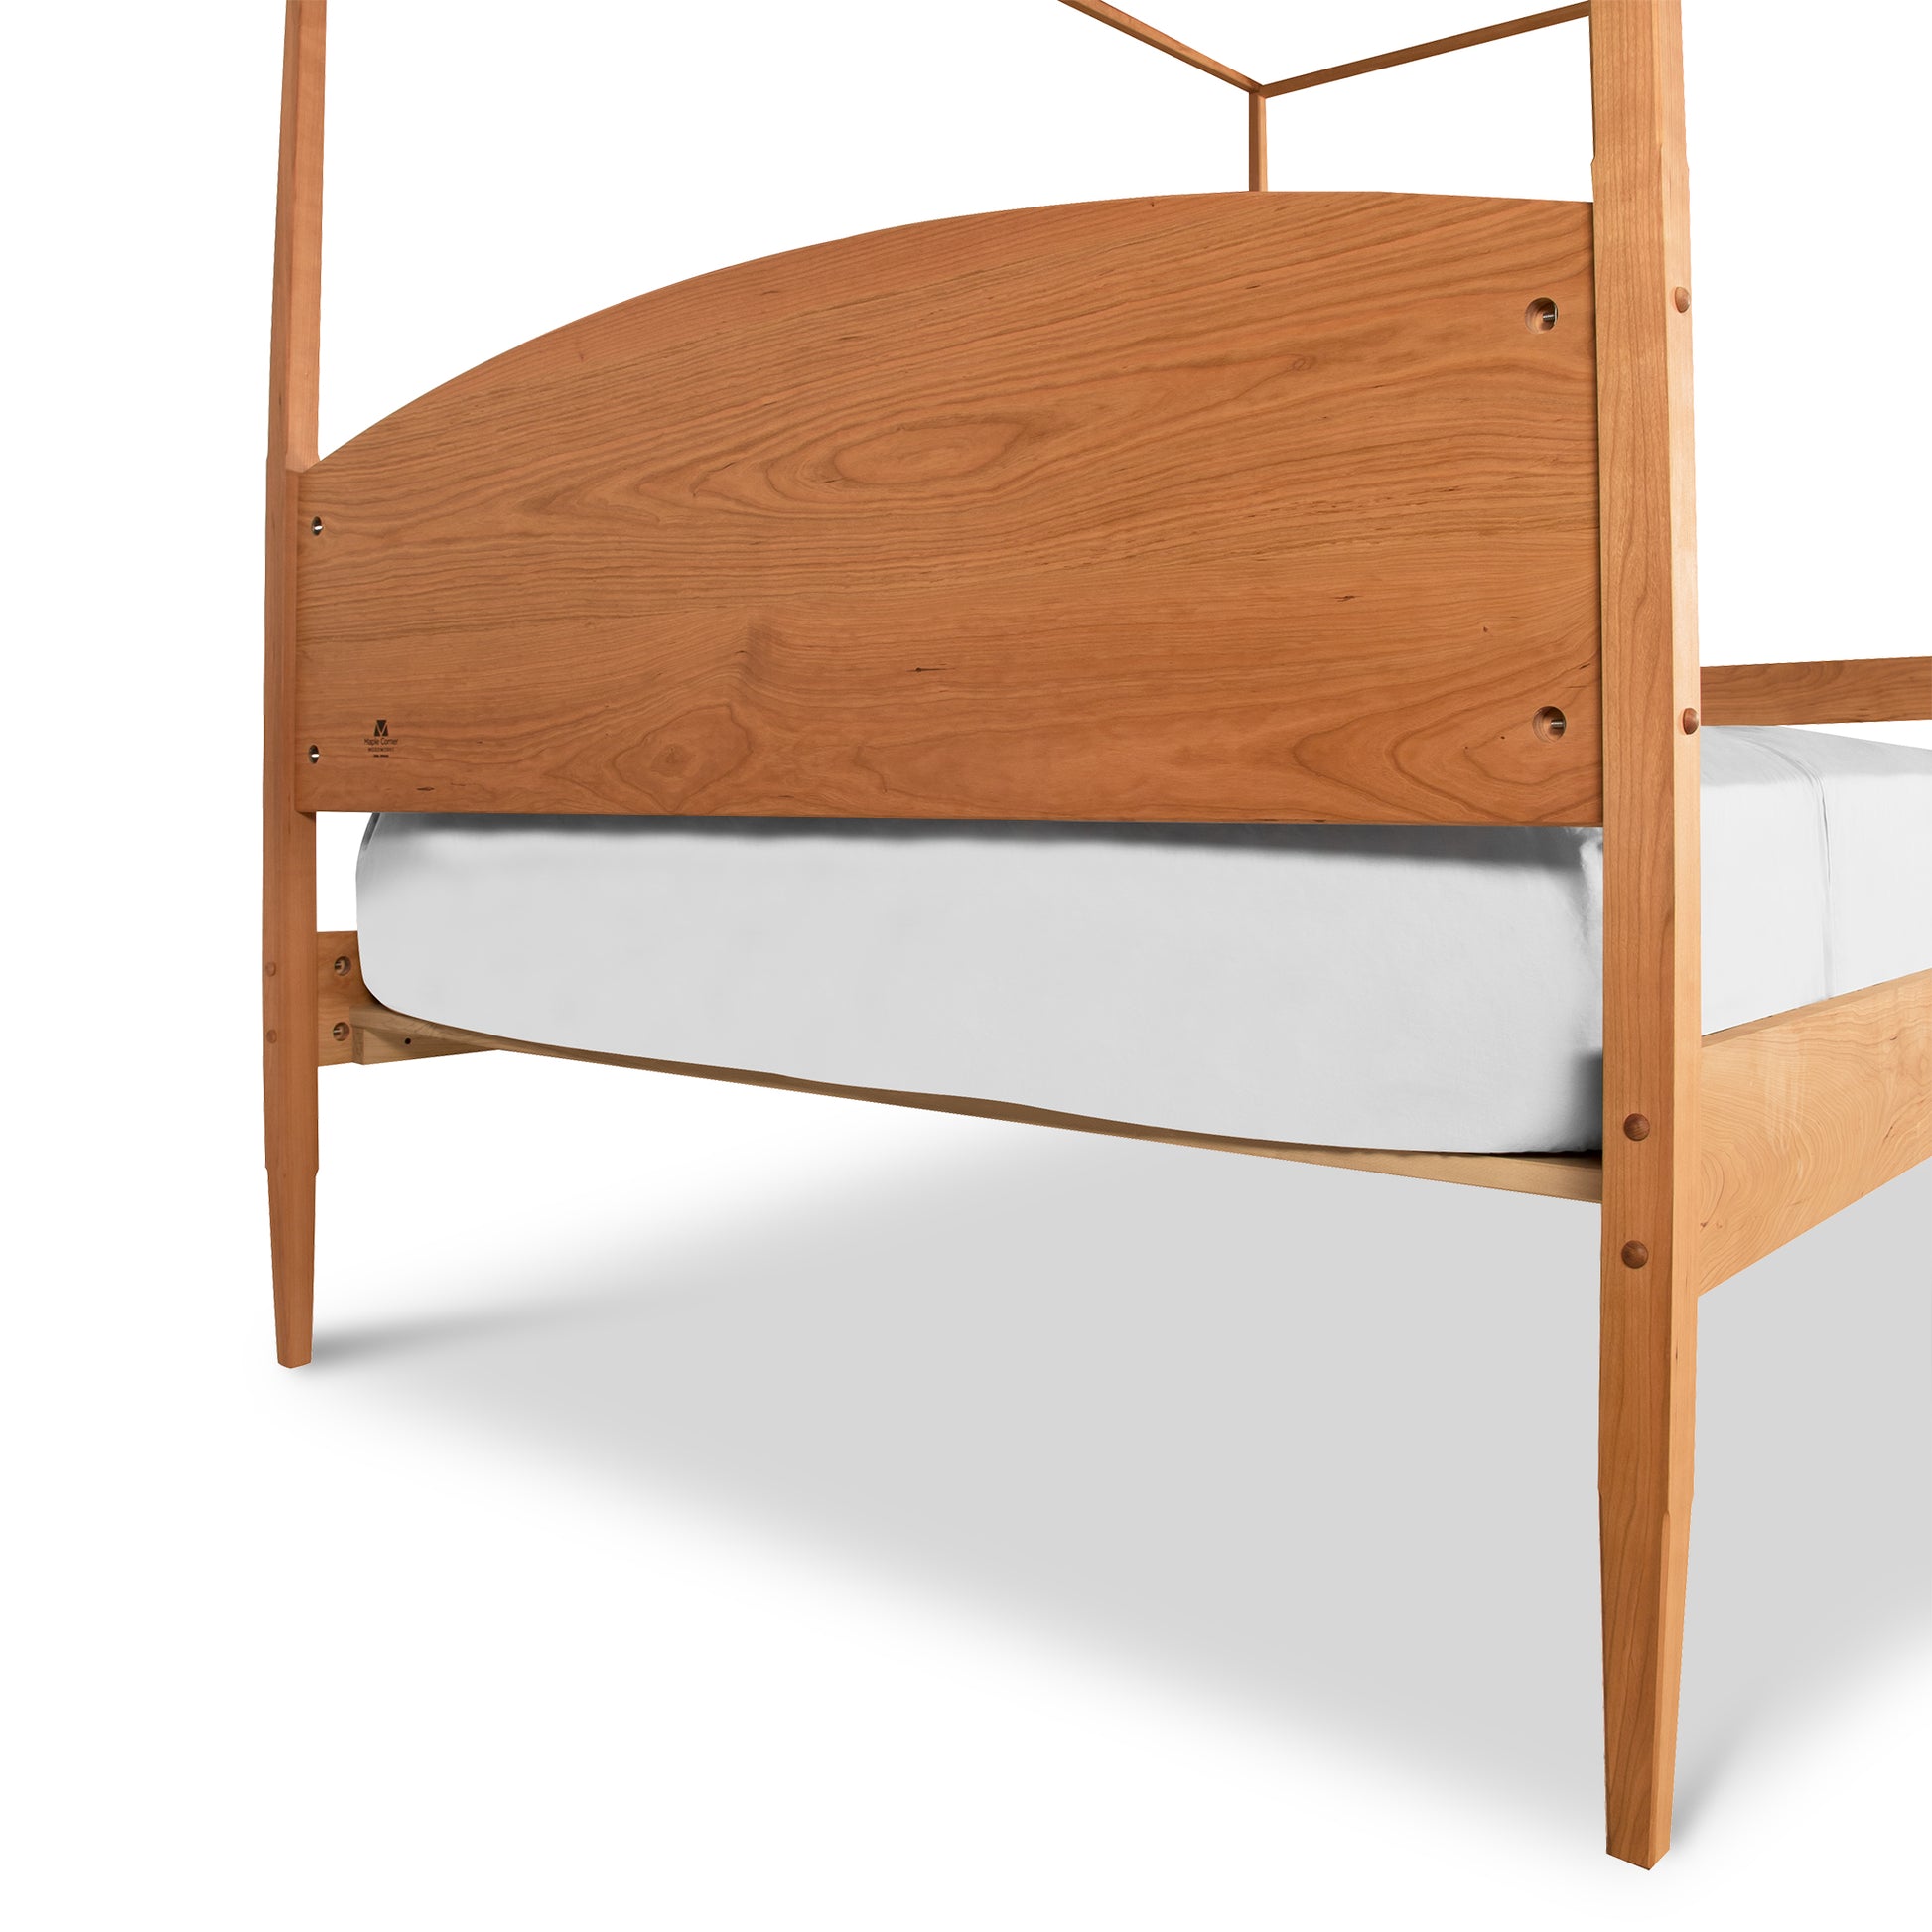 A Maple Corner Woodworks Vermont Shaker Four Poster Bed with Canopy frame with an angled headboard, featuring visible wood grain details, supporting a white mattress. The frame's clean design emphasizes simplicity and modern aesthetics.